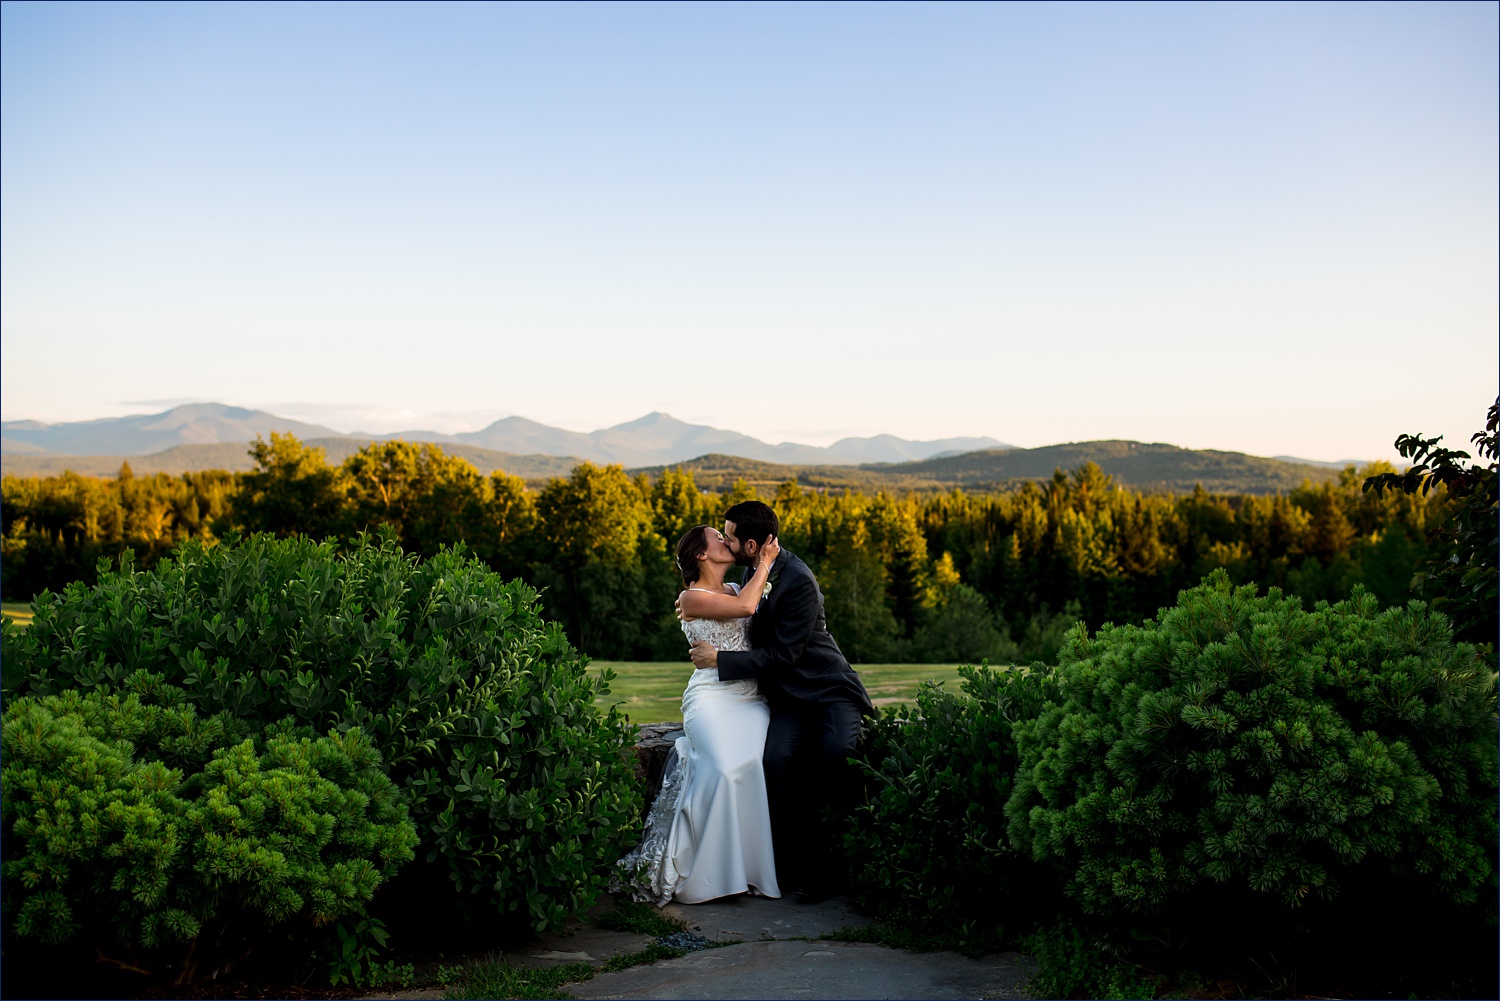 Romance from the wedding couple at the Mountain View Grand Resort in New Hampshire